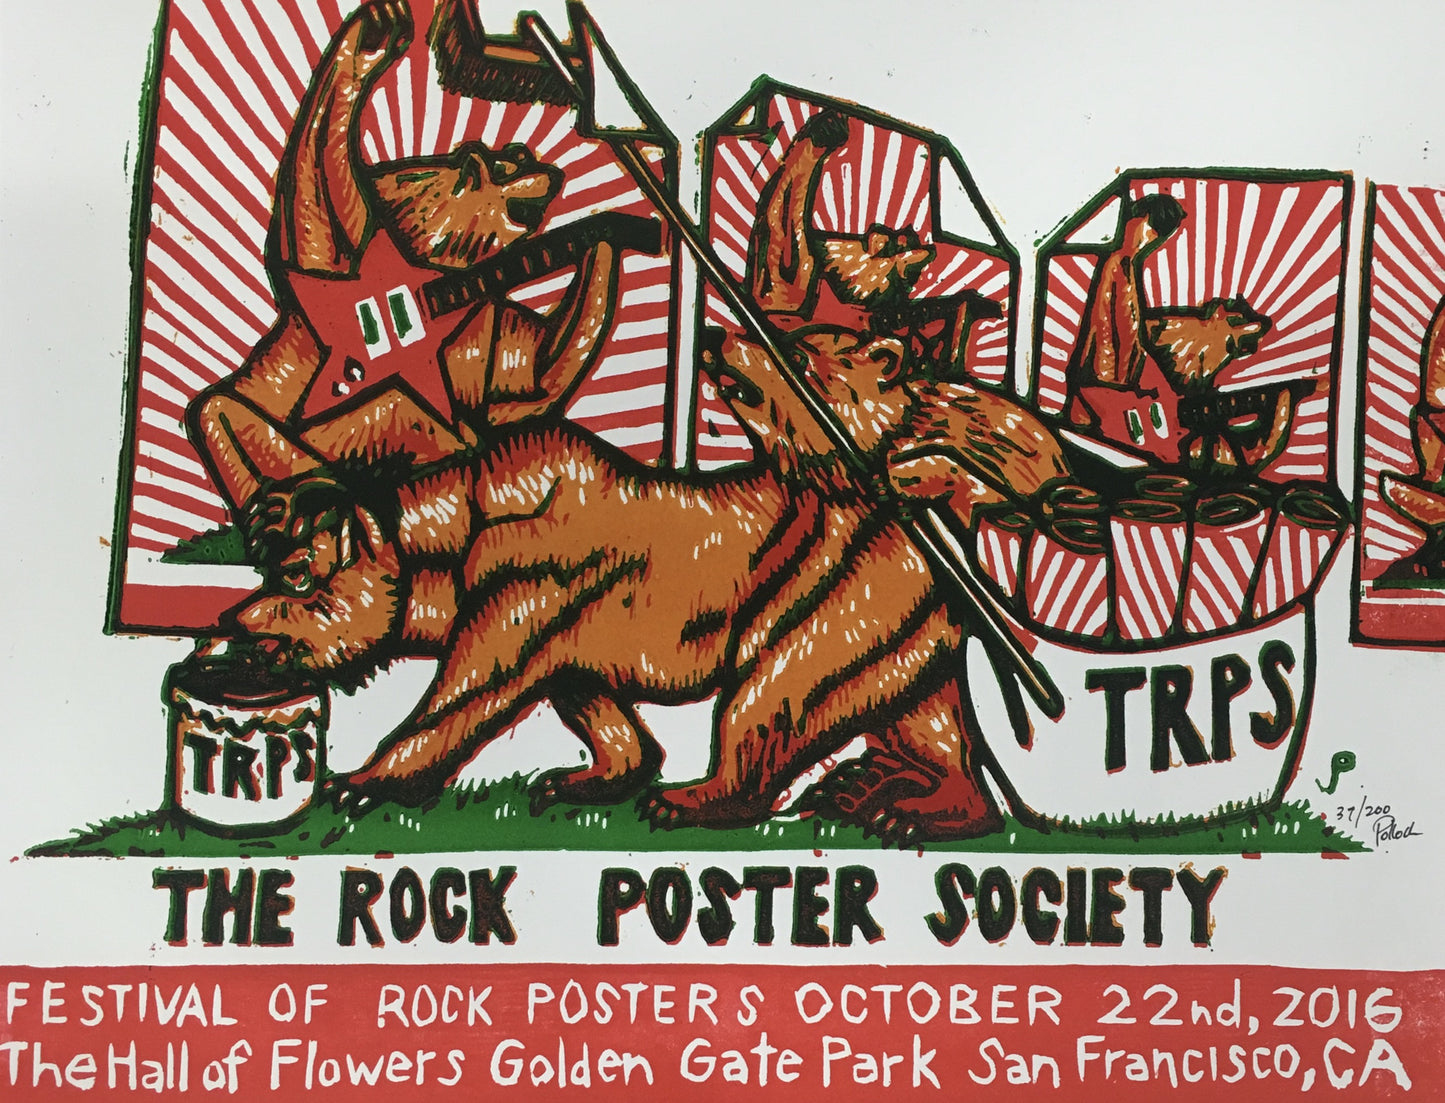 Jim Pollock "TRPS: The Rock Poster Society - October 22nd, 2016"